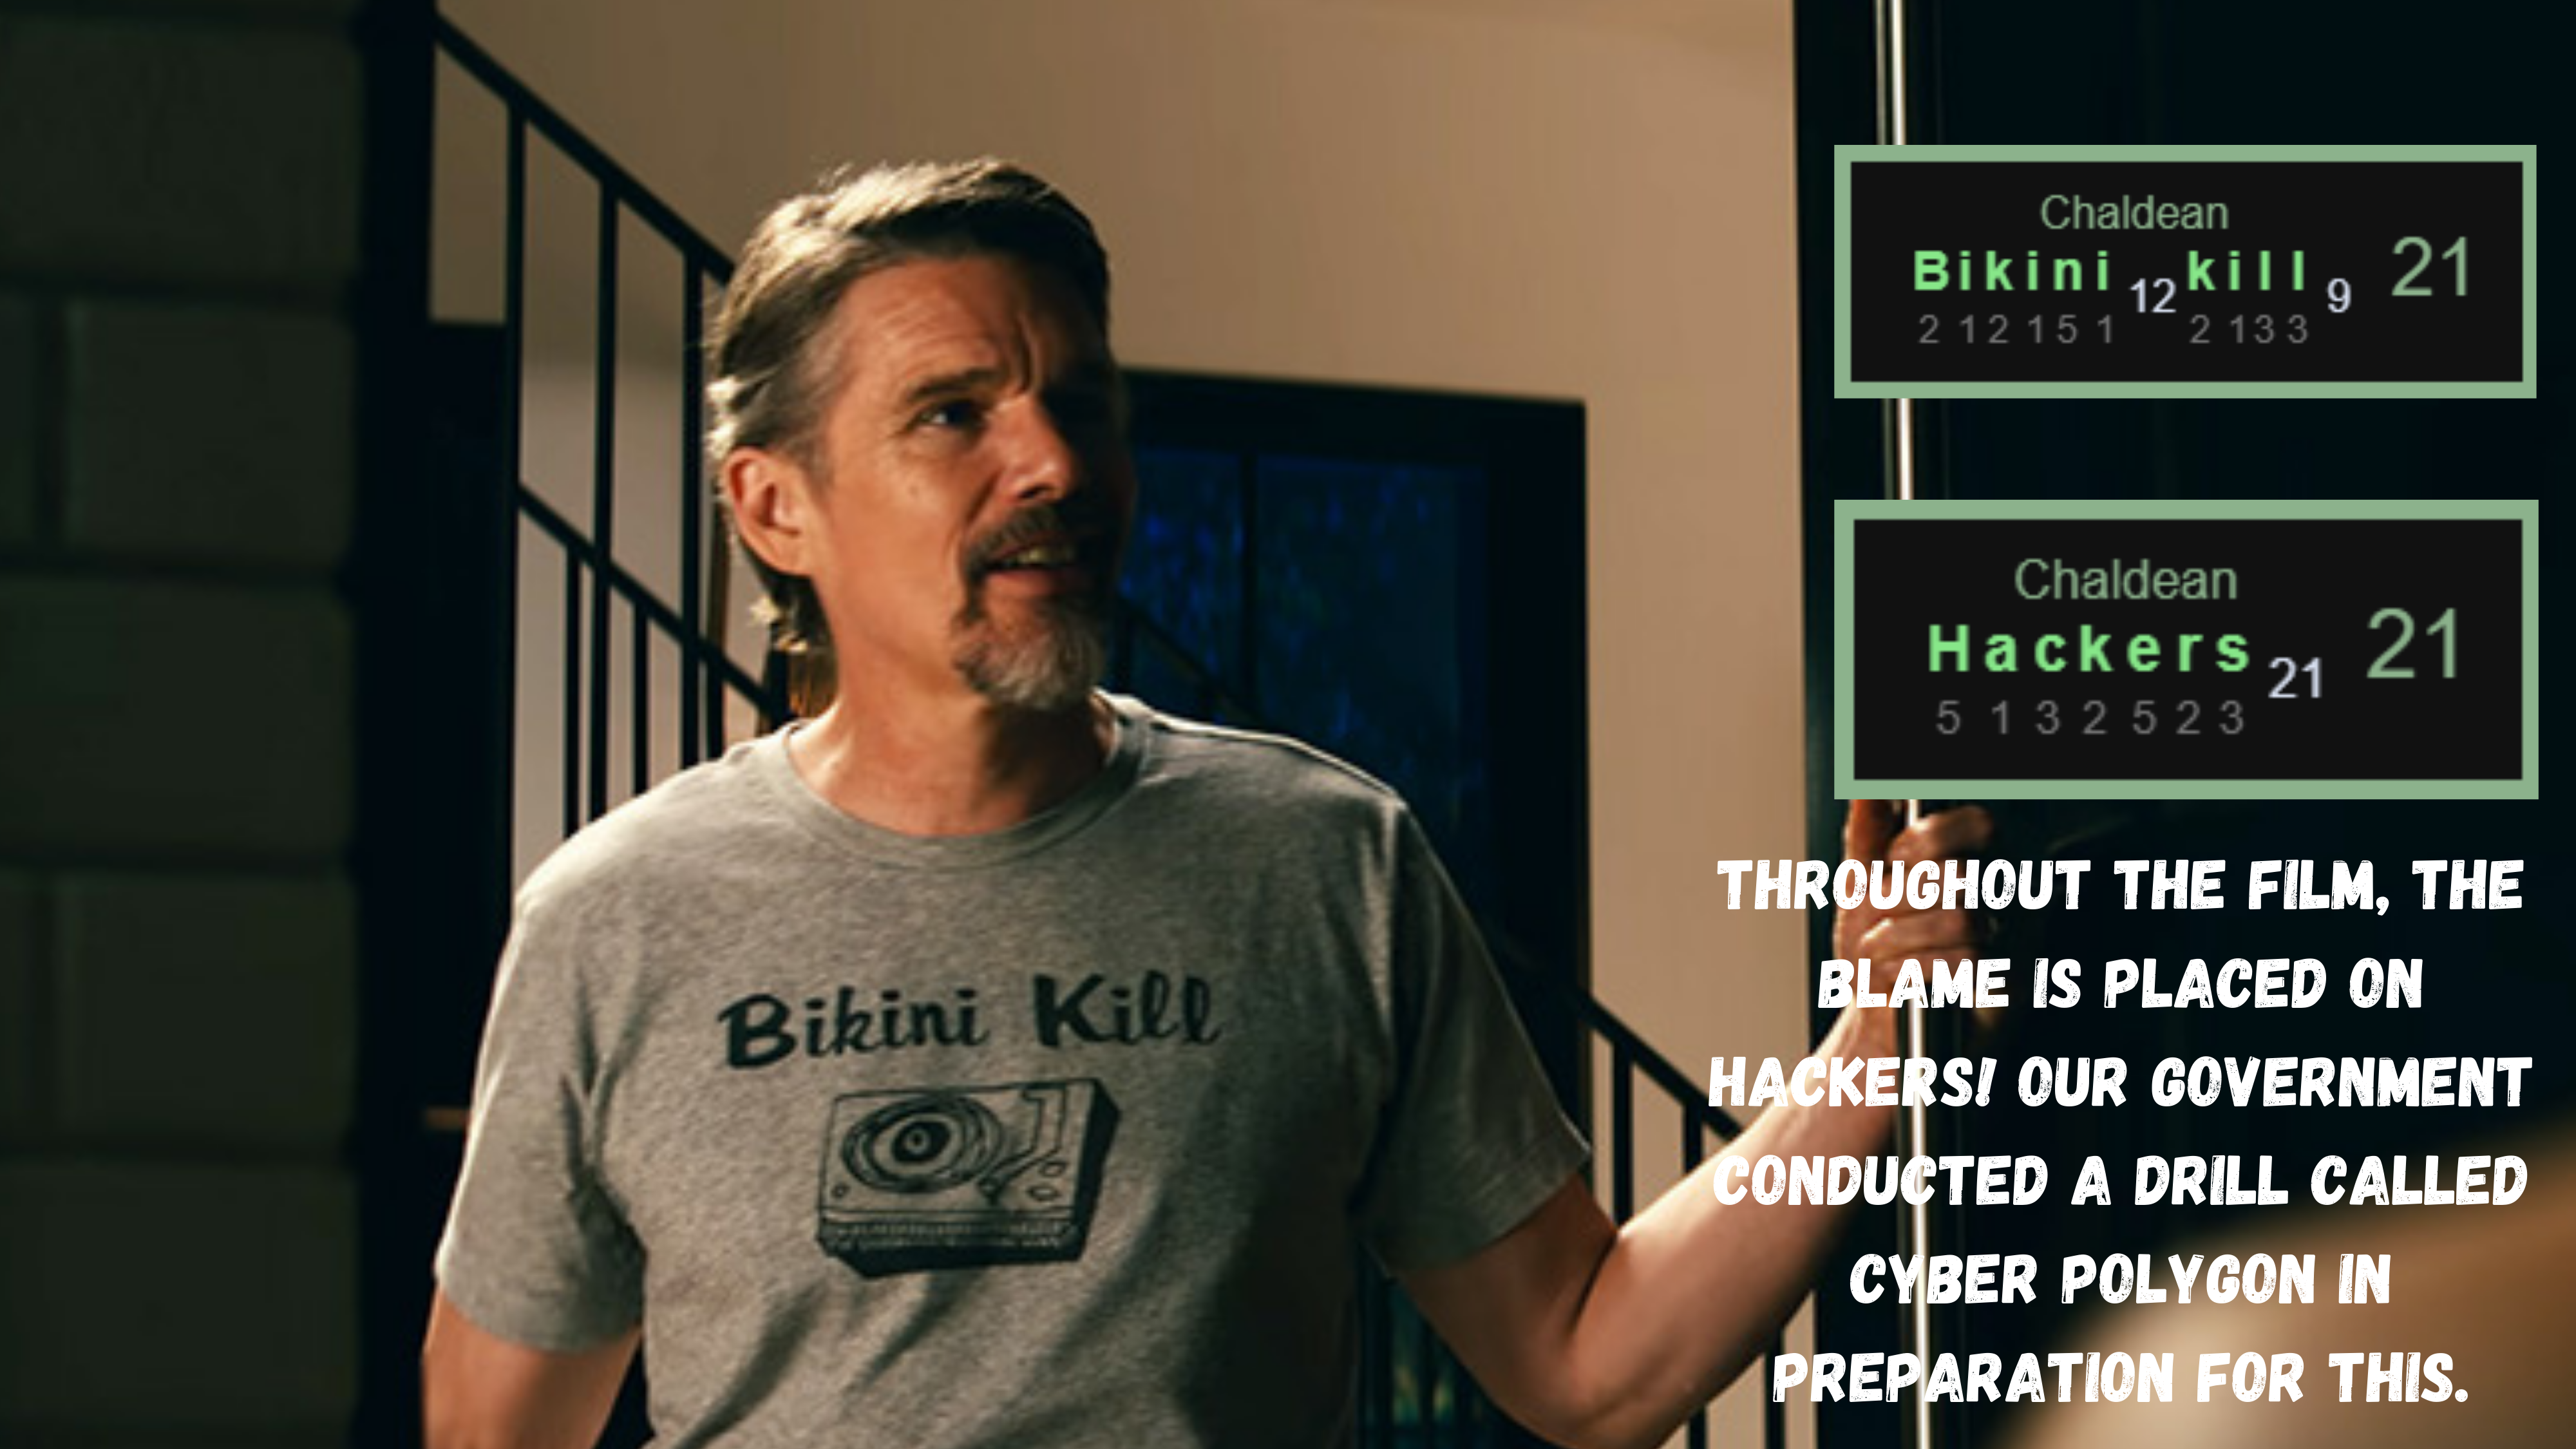 During The First Part Of The Movie, Clay Wears A Bikini Kill T-Shirt. Characters In The Movie Often Wear Symbolic Garments.